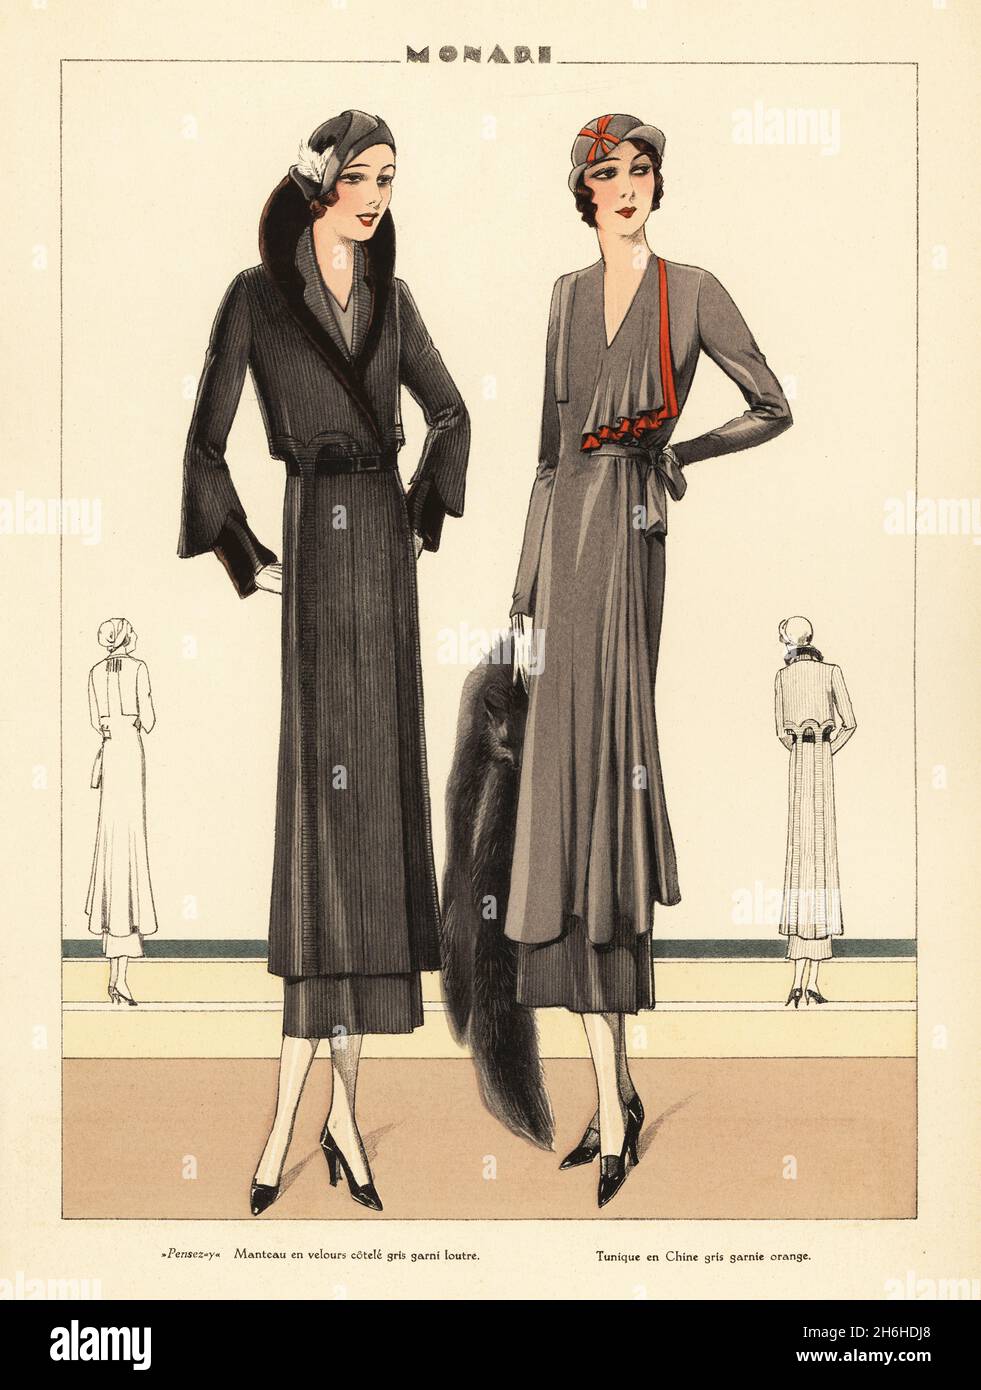 Woman in Pensez-y velvet corduroy coat trimmed with otter. fur Woman in  tunic of grey crepe de Chine trimmed with orange. Marcel wave bob  hairstyles and cloche hats. Fashion designs by Monari.